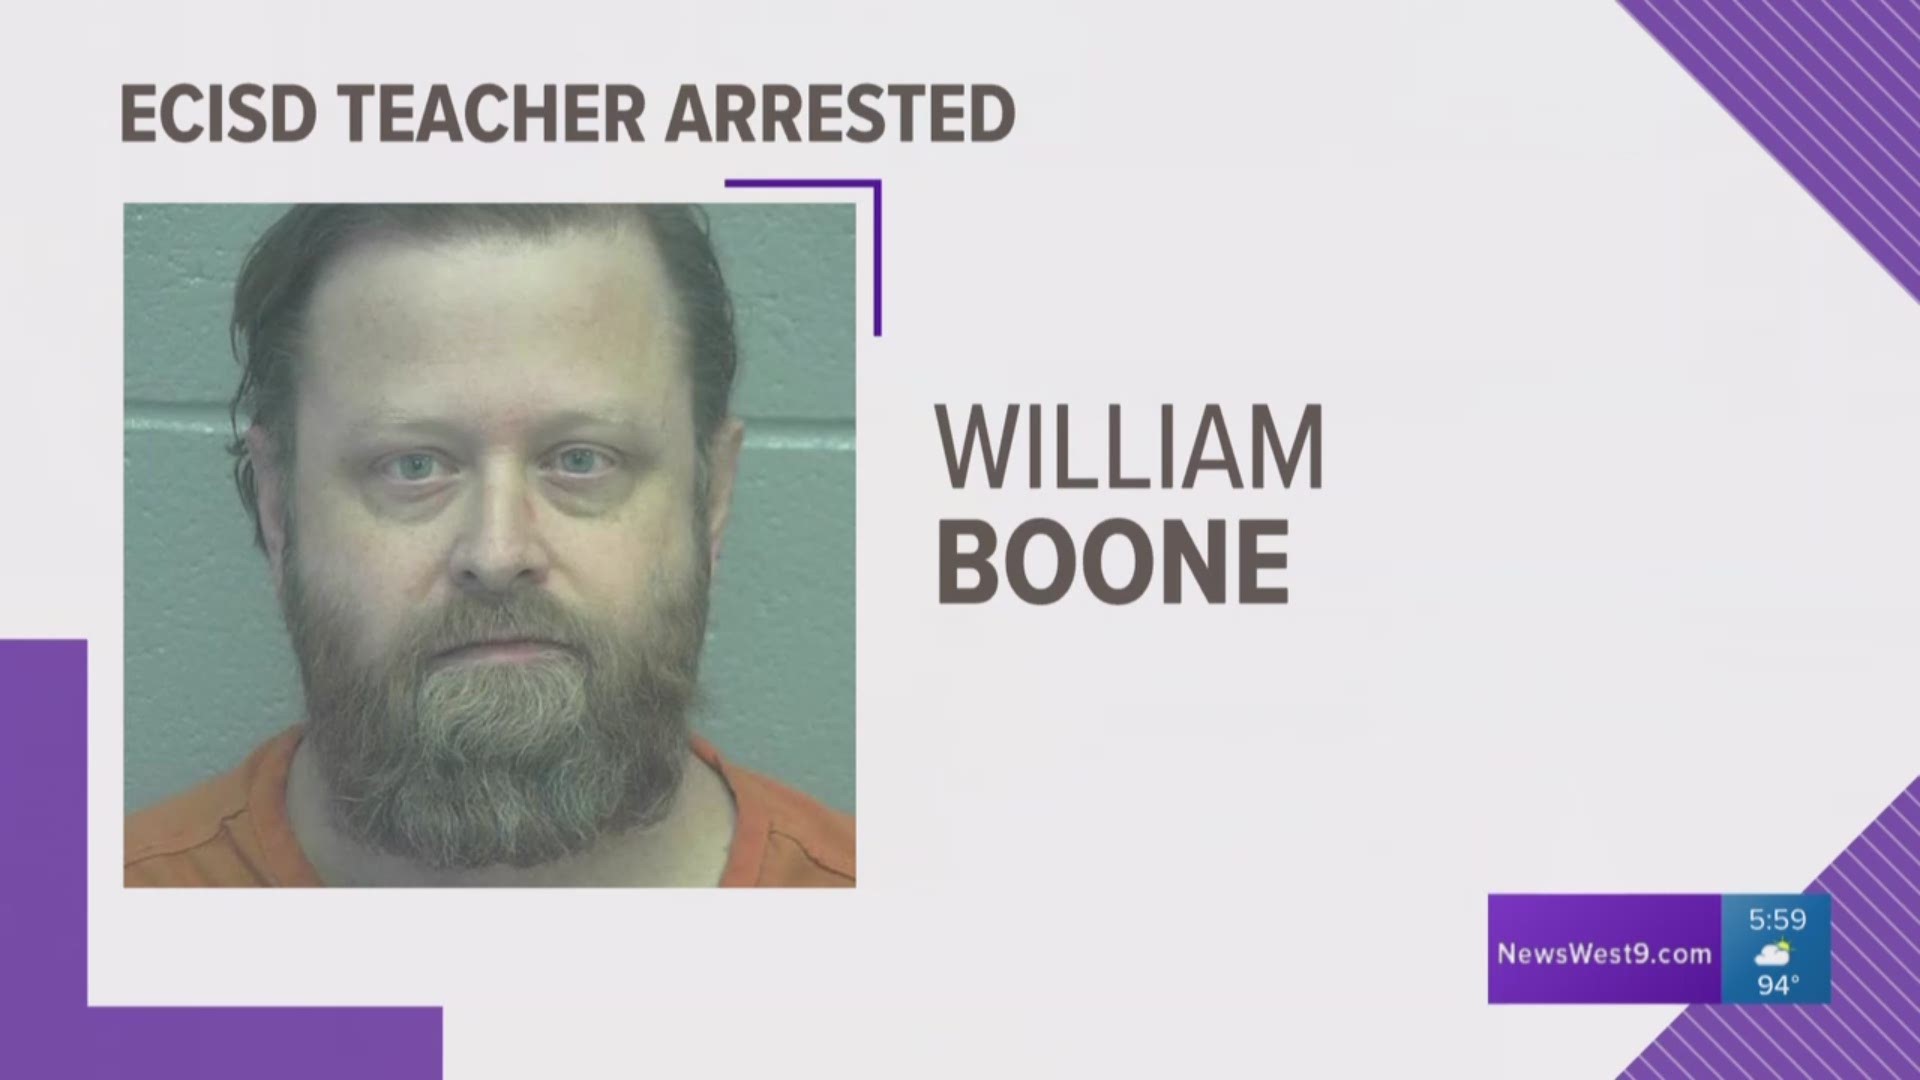 William Boone was arrested Tuesday after having an investigation revealed he had an improper relationship with a student last spring.